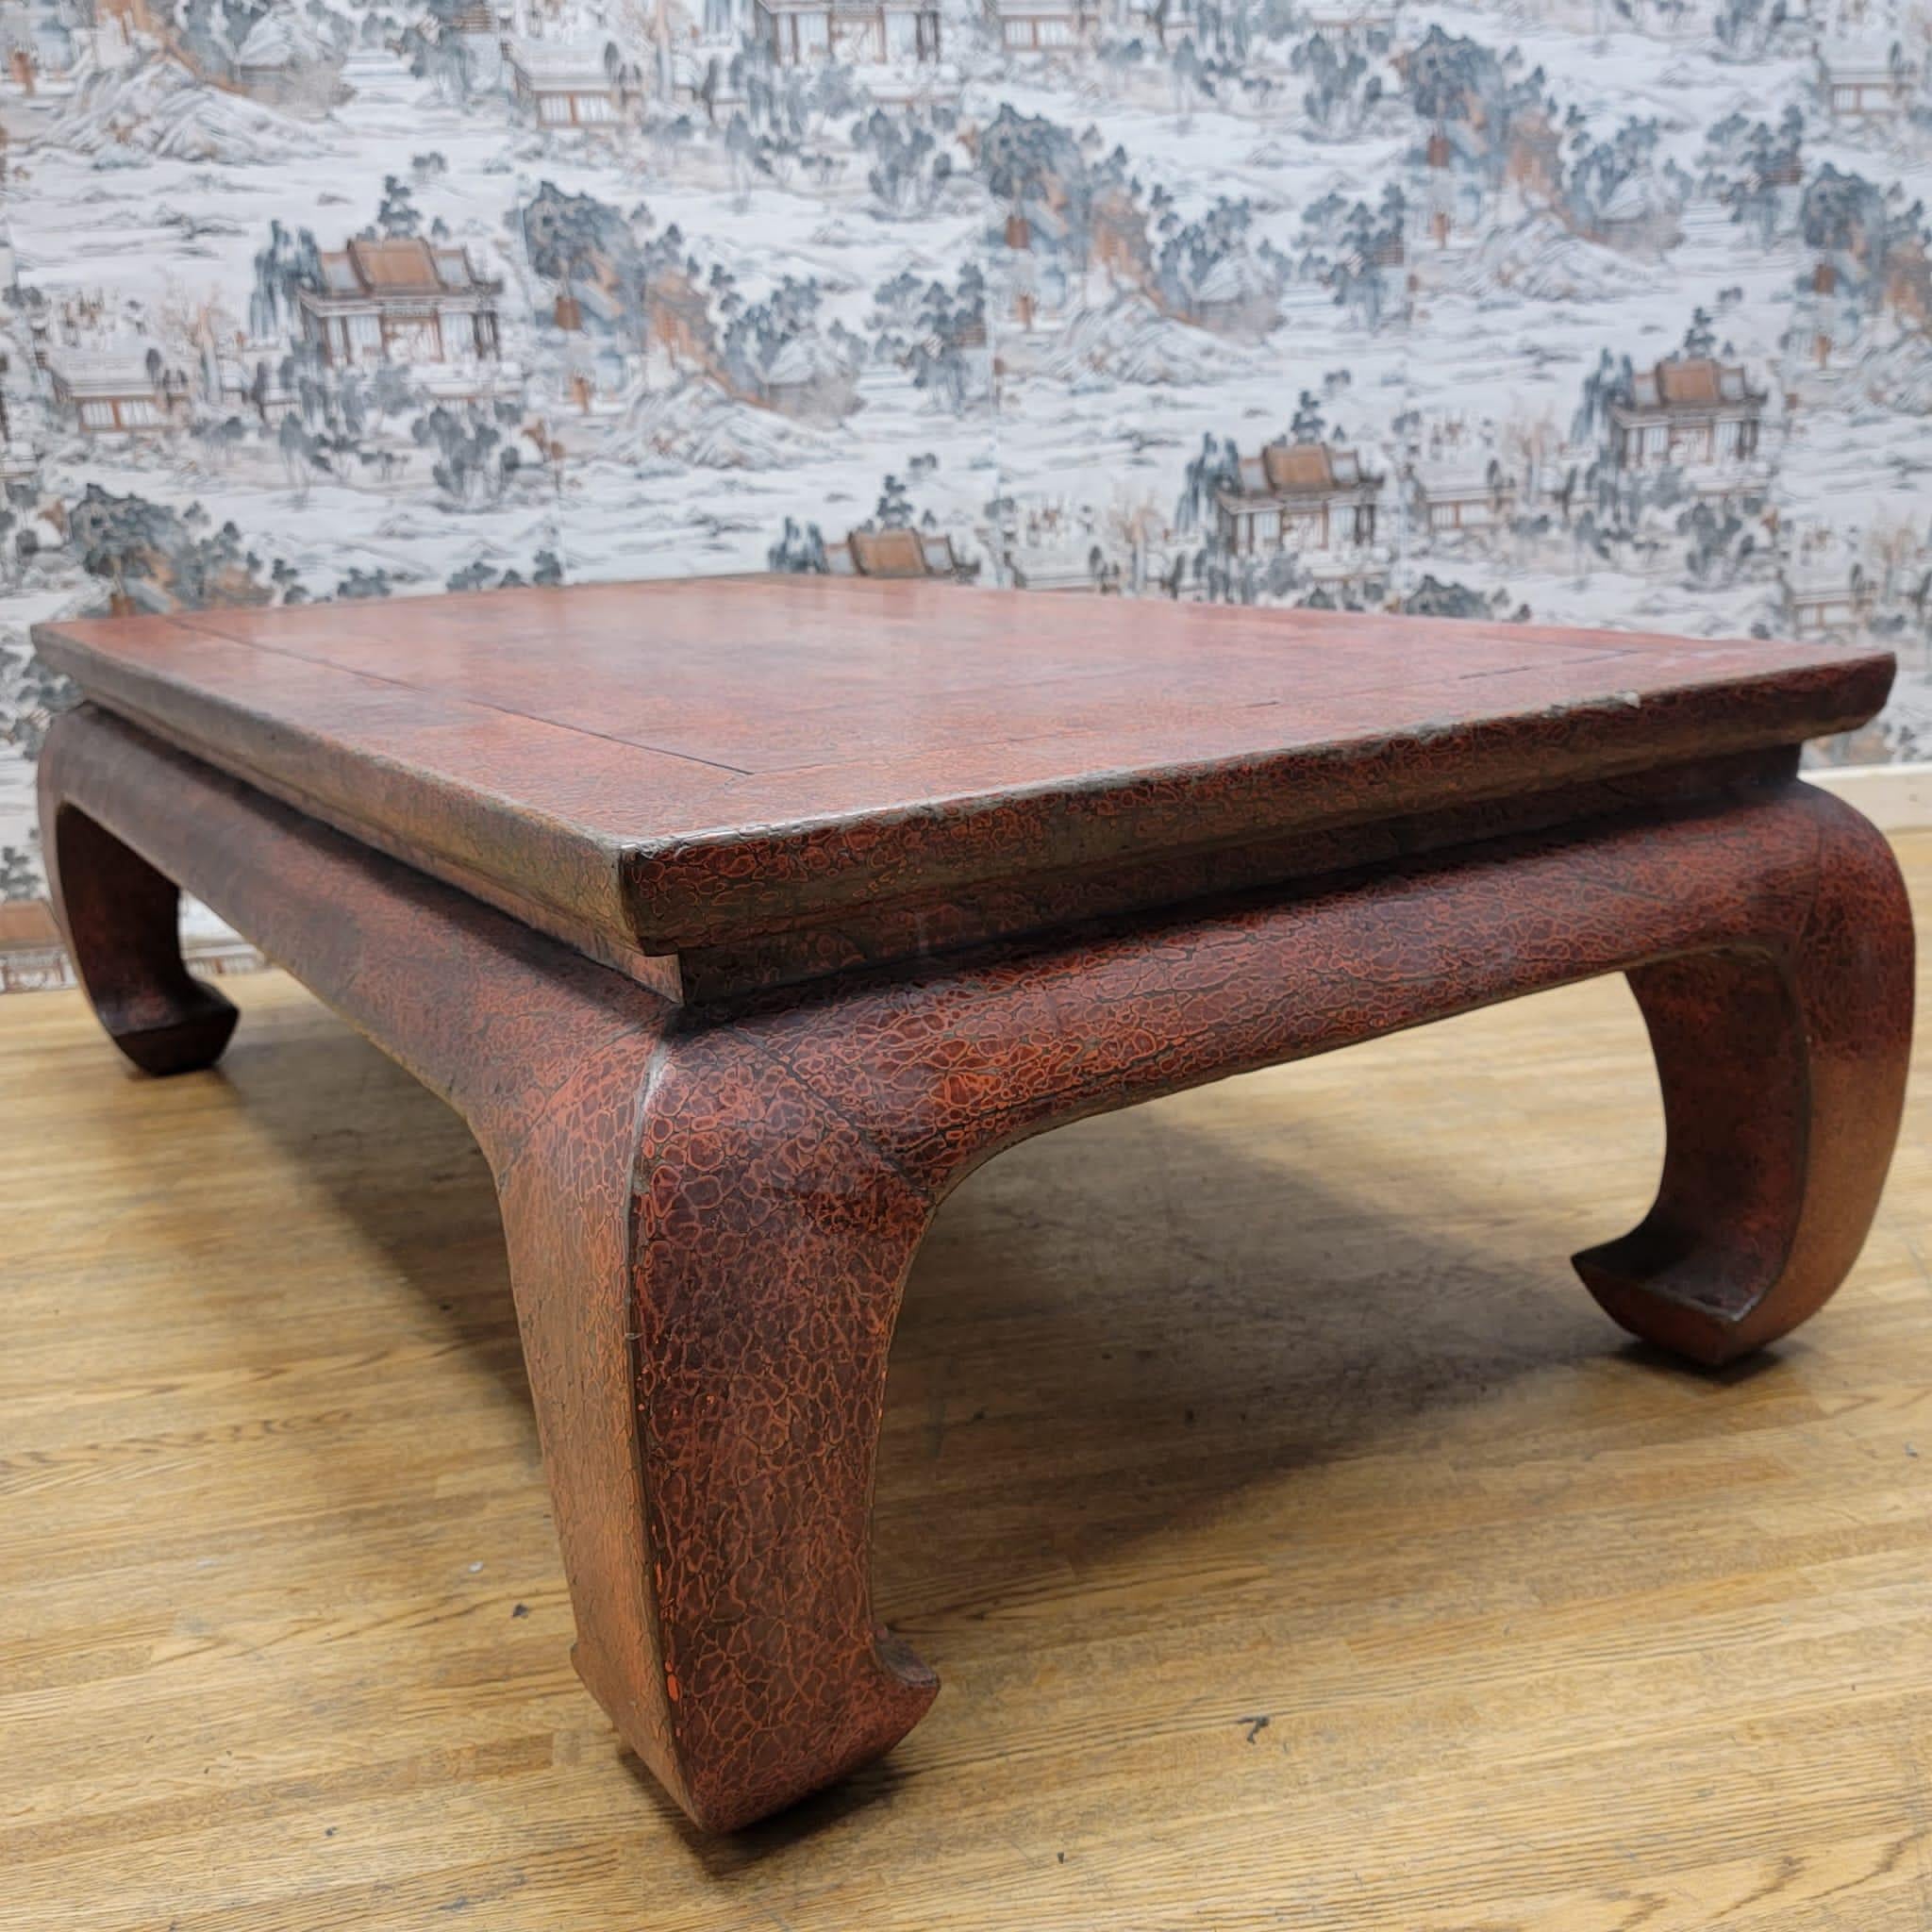 Antique Shanxi Province Red Lacquer Elm Coffee Table

This Antique Shanxi Province coffee table is made of elm, and has red lacquer. The color and patina are all original. This coffee table will brighten up any living space. 

Circa 1900

H 17.5